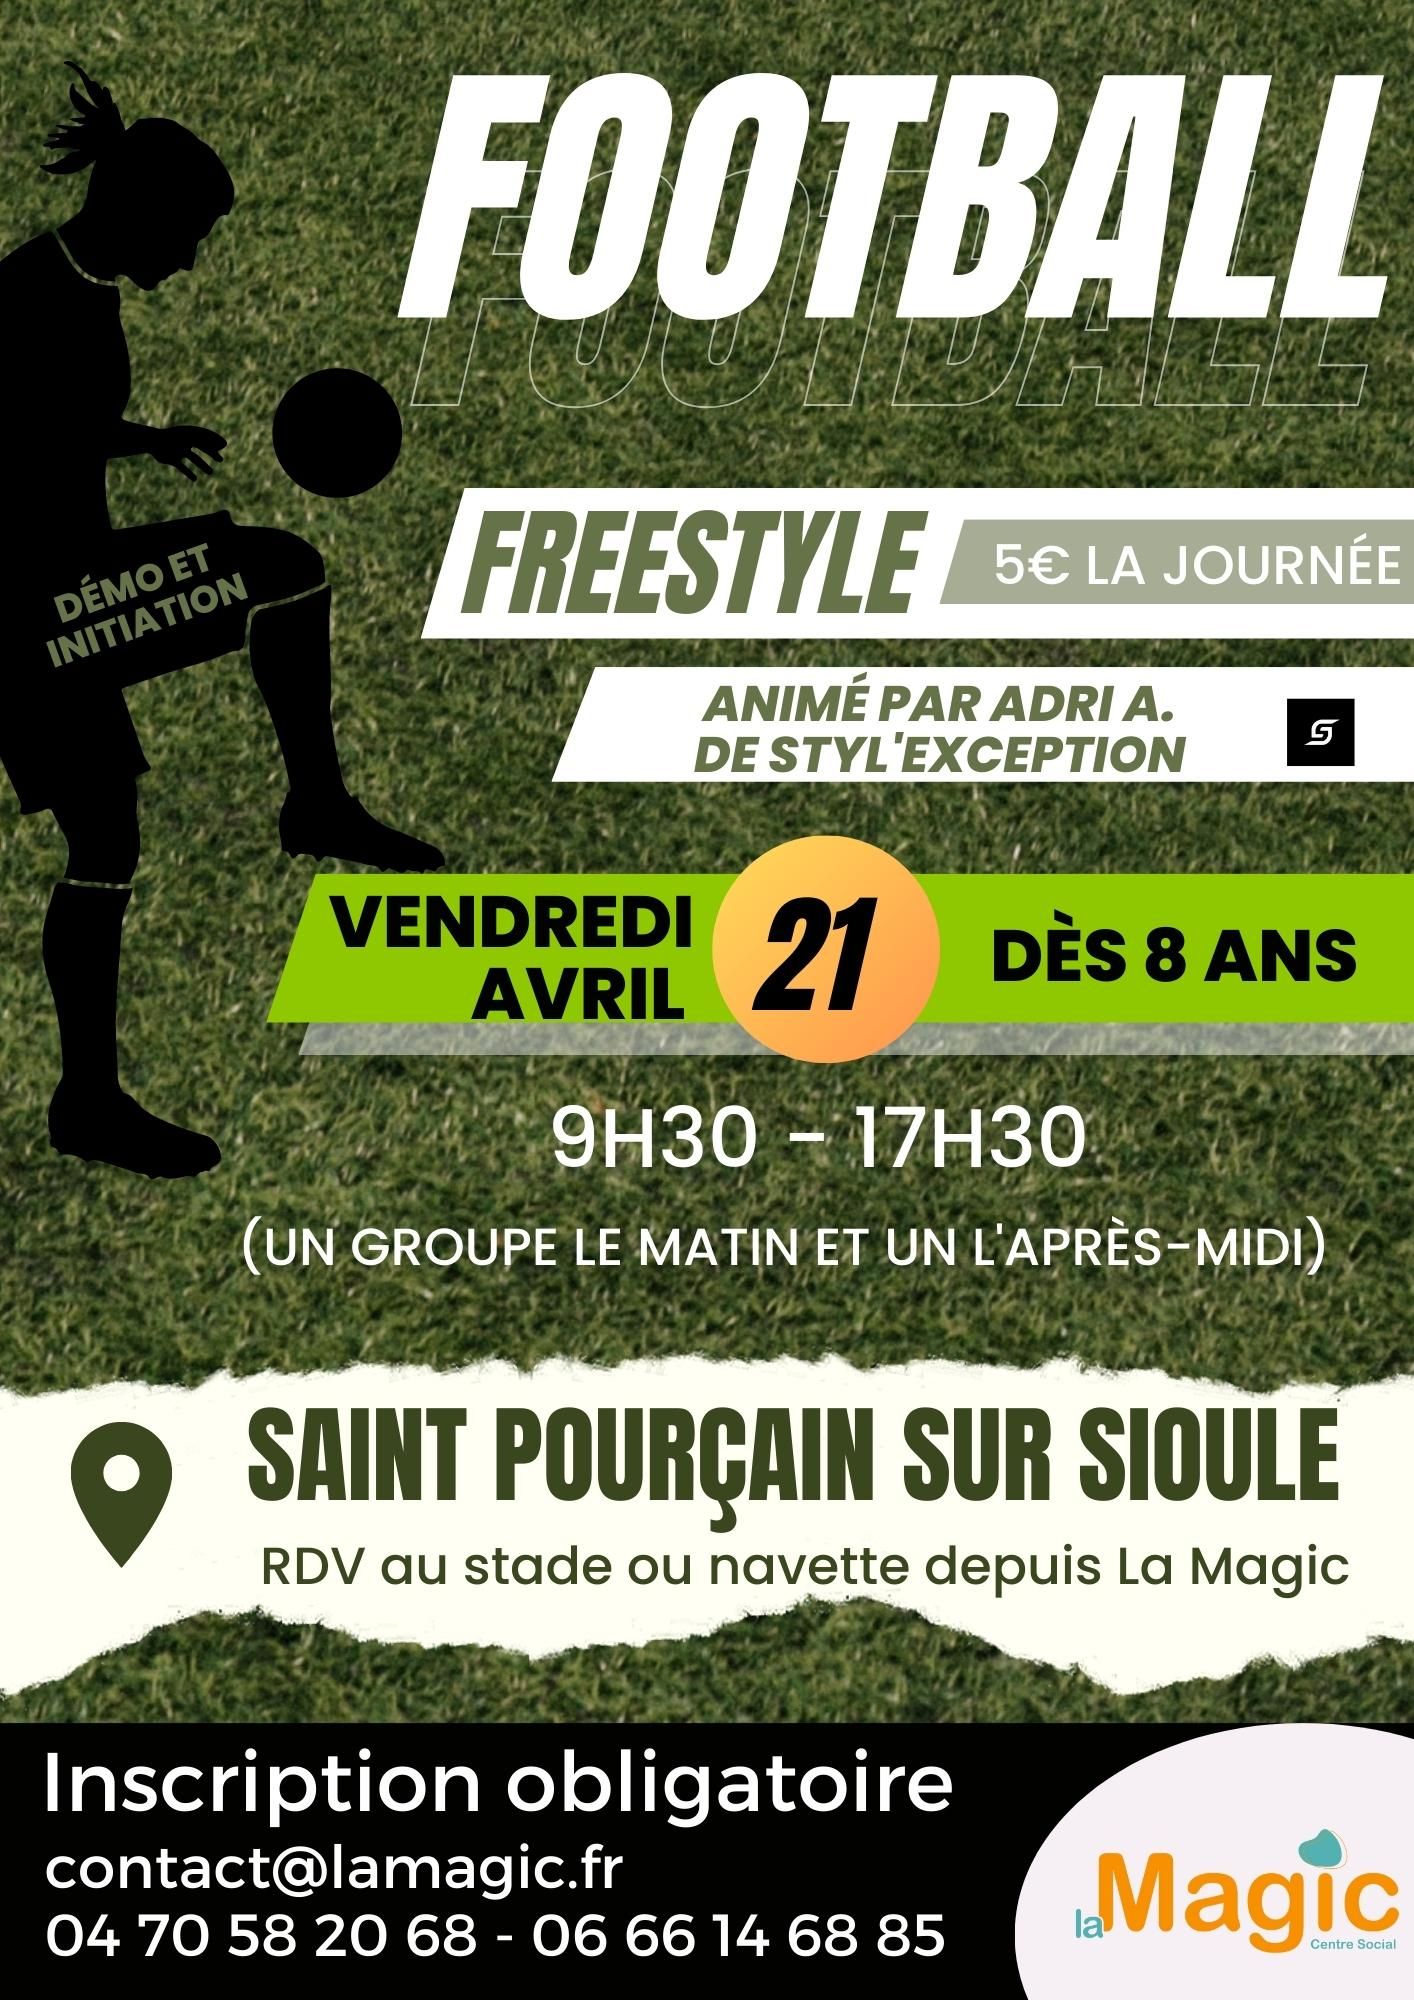 Foot Freestyle